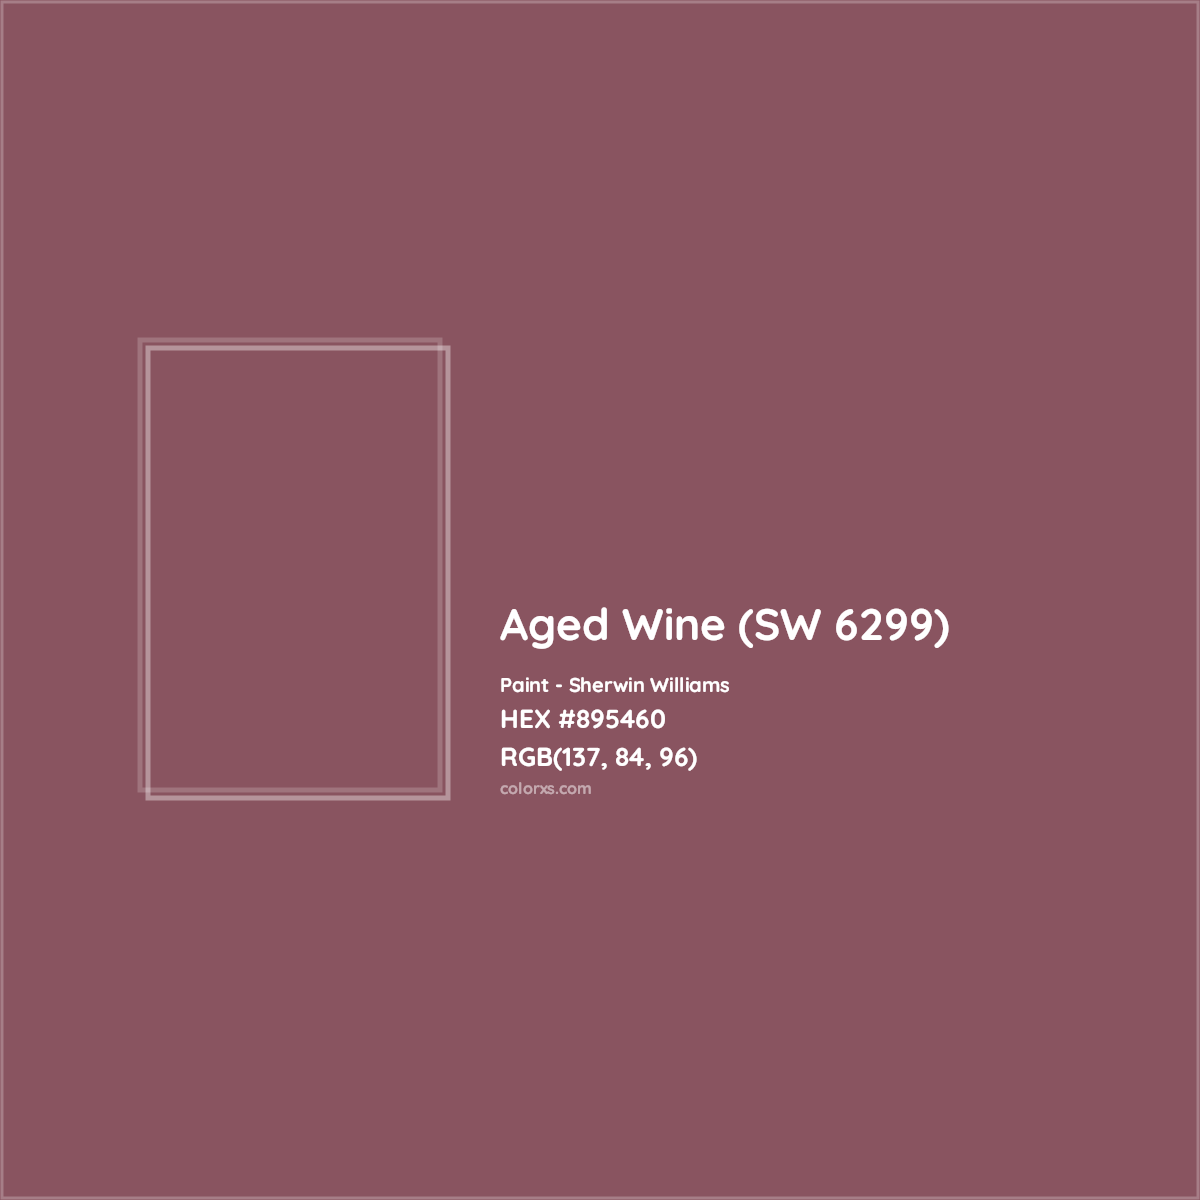 HEX #895460 Aged Wine (SW 6299) Paint Sherwin Williams - Color Code